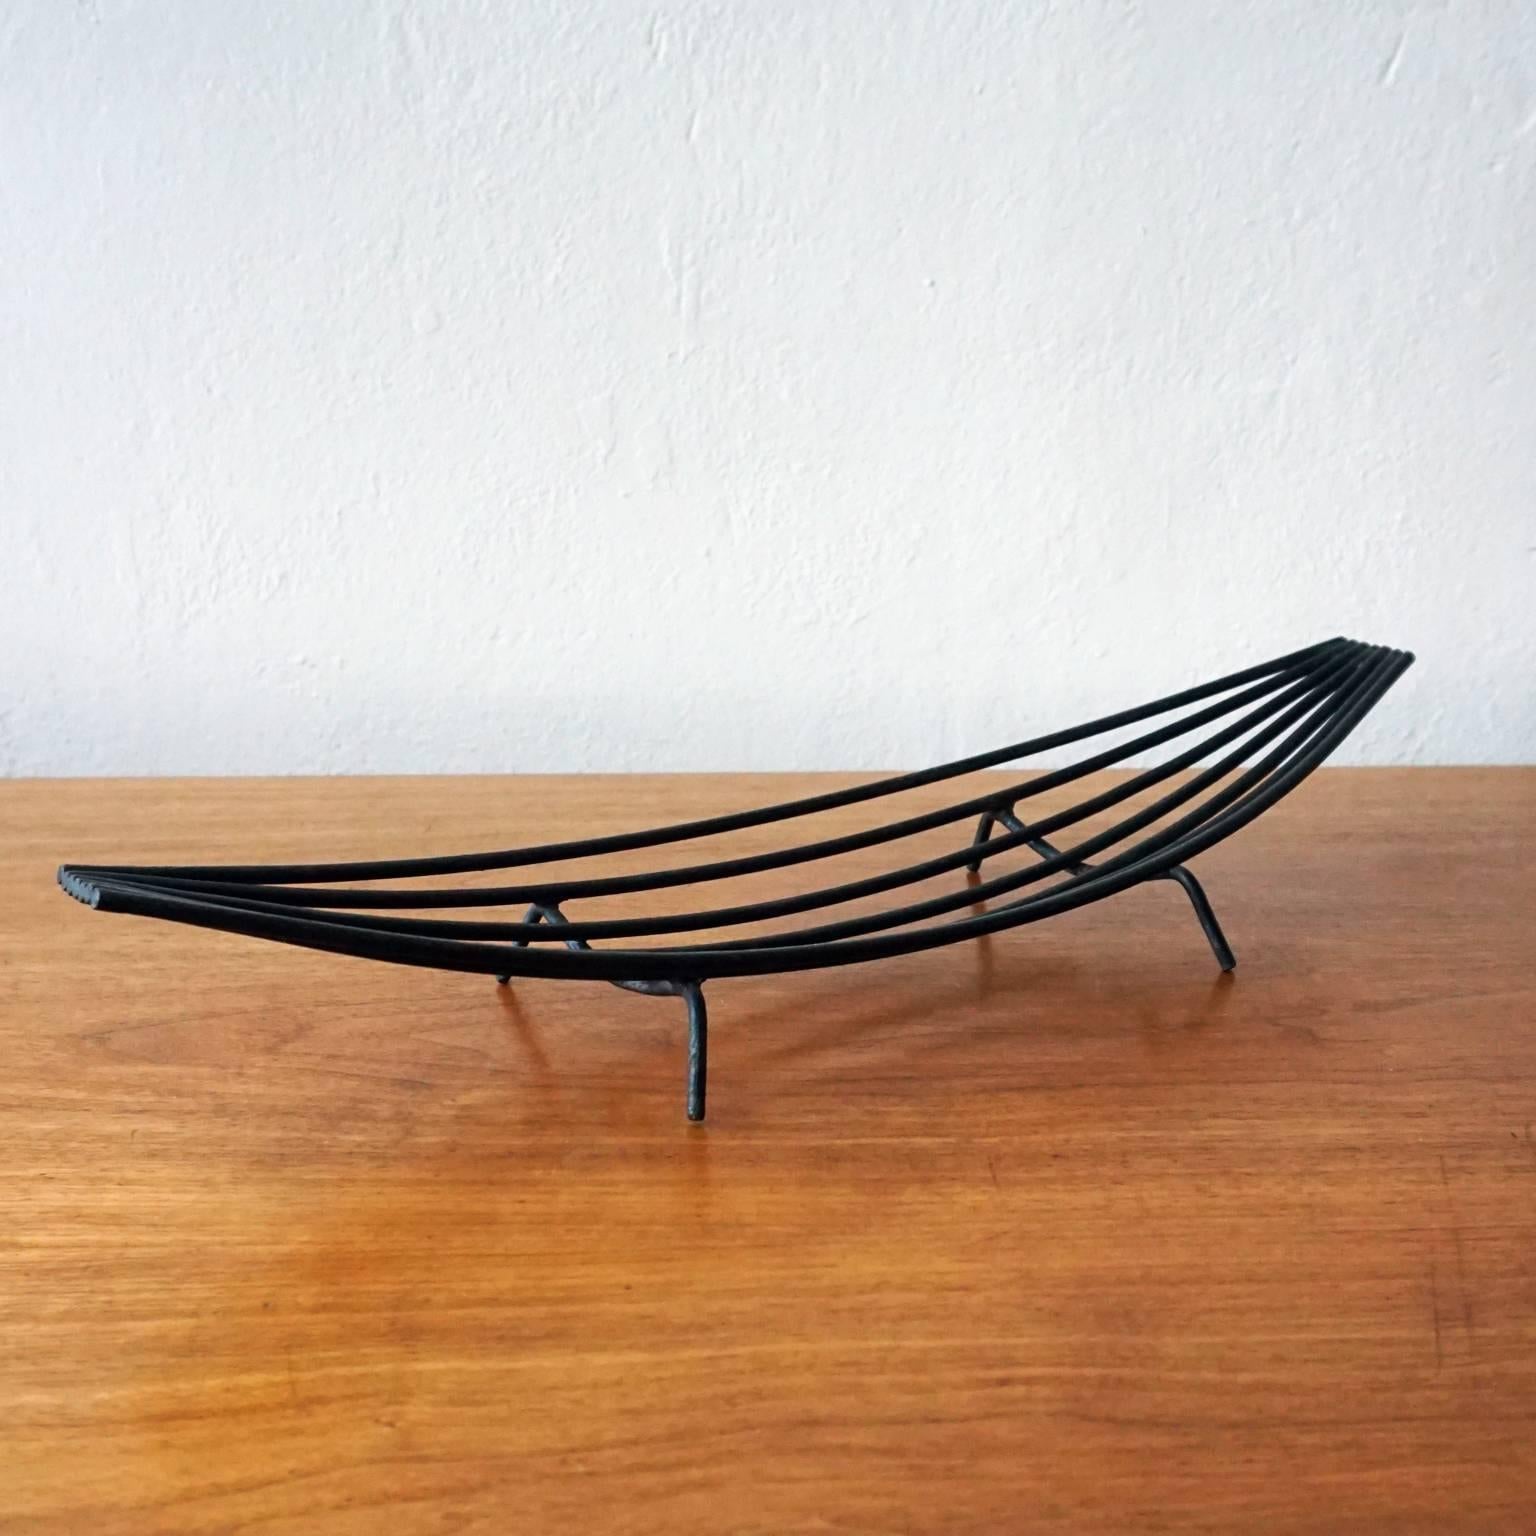 1950s fruit basket or catch all. Clean sculptural design that looks great on its own or could be used to hold fruit, mail, or ??? High quality and sturdy construction, with original finish.